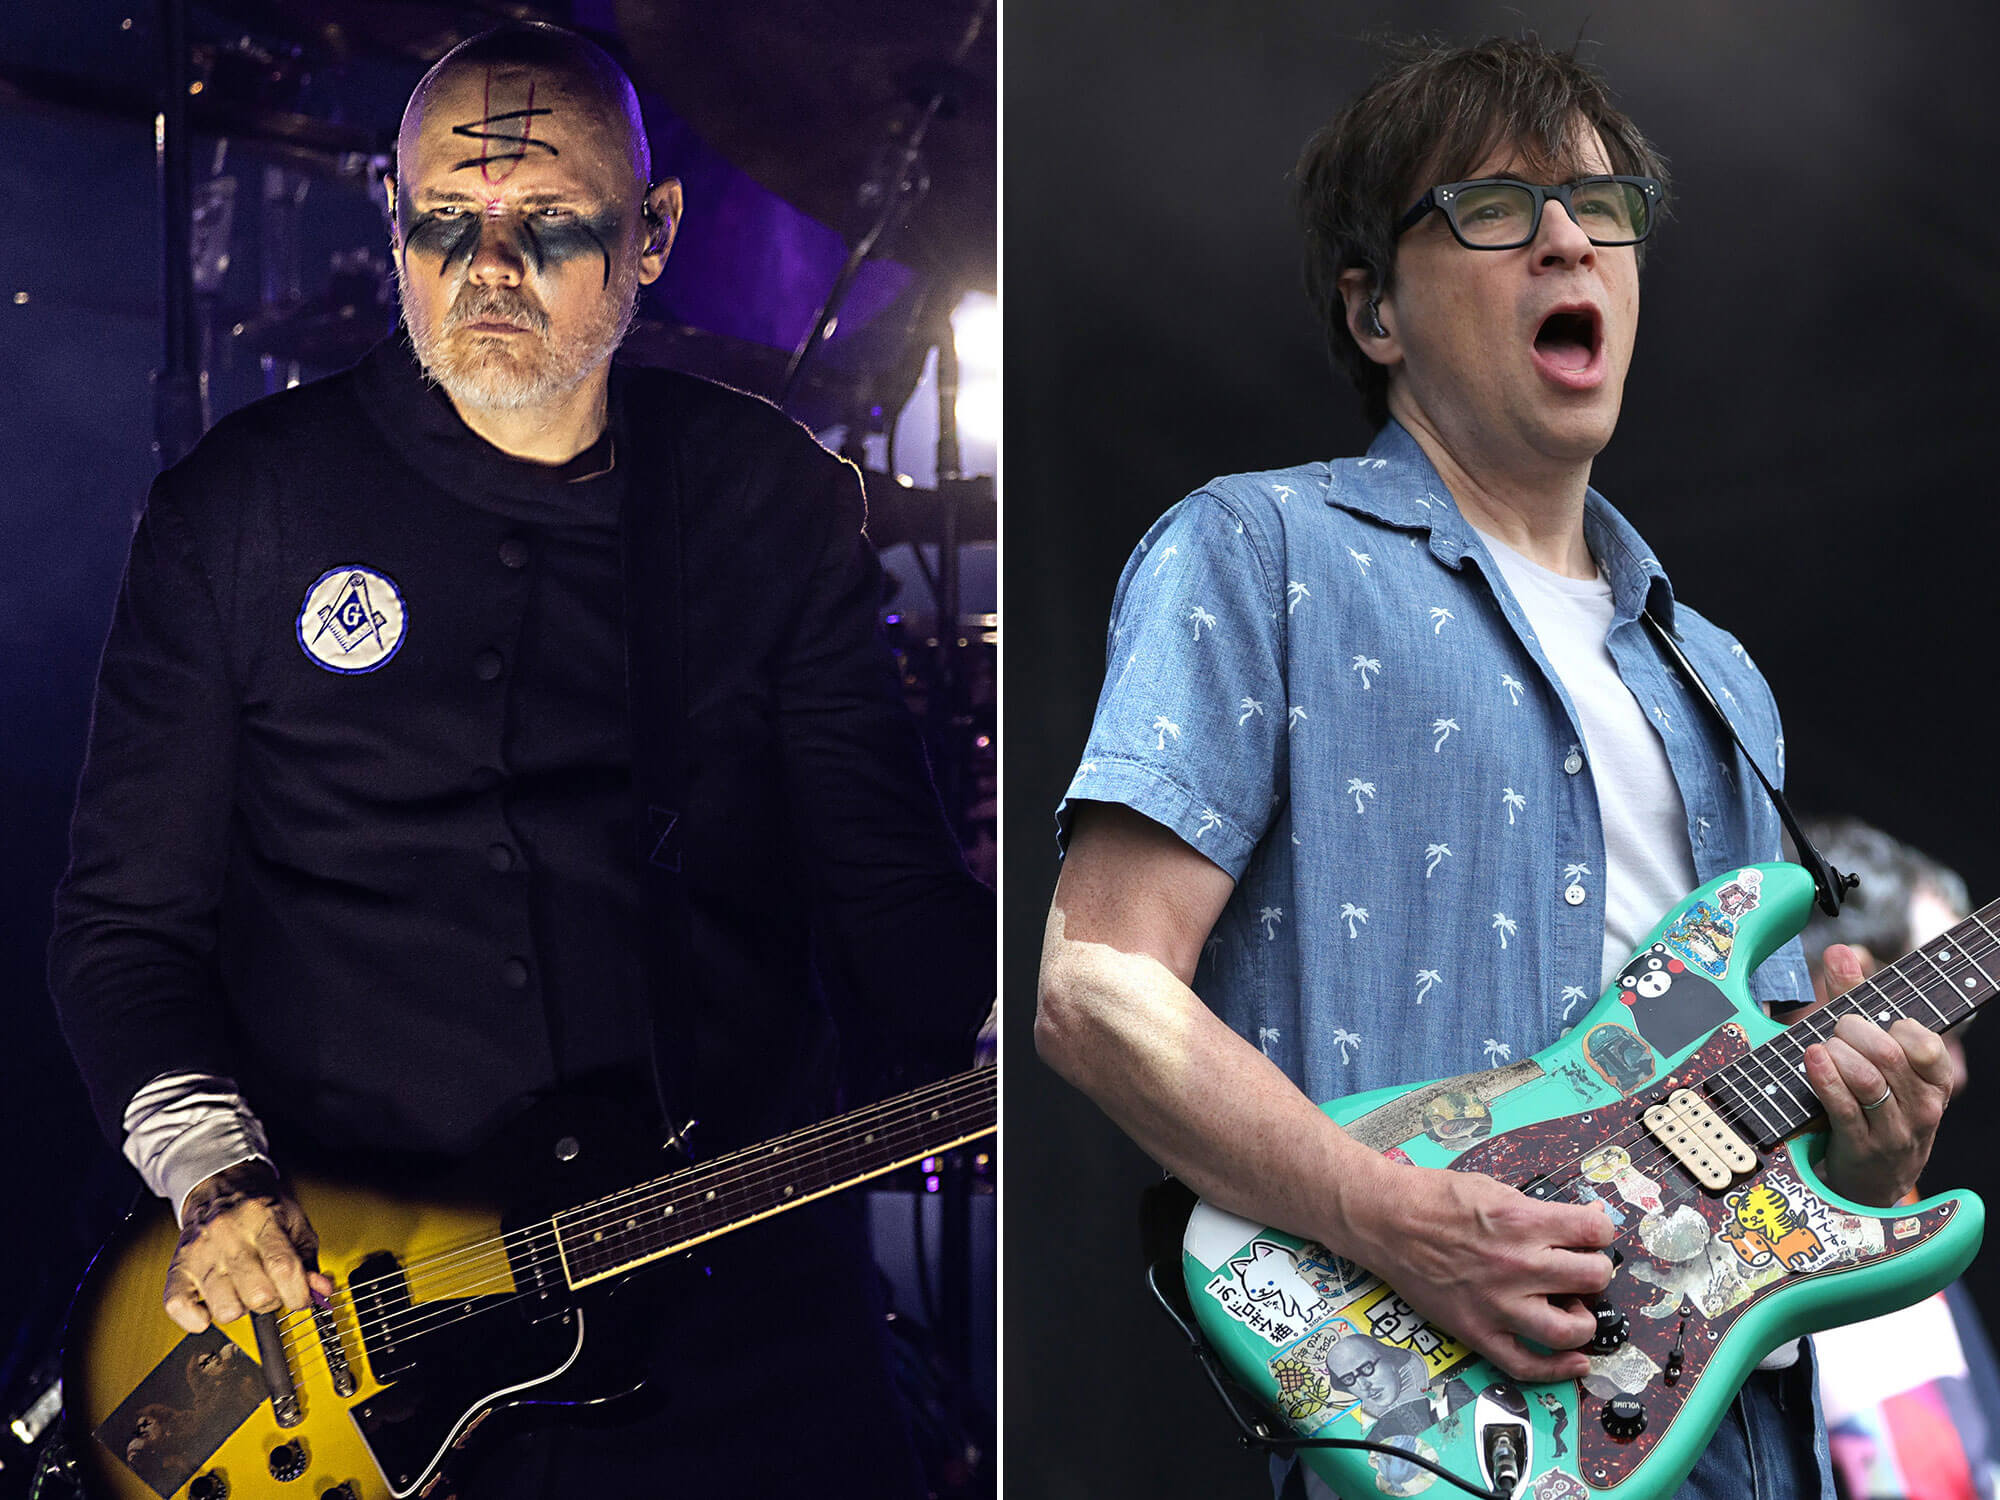 [L-R] Billy Corgan and Rivers Cuomo